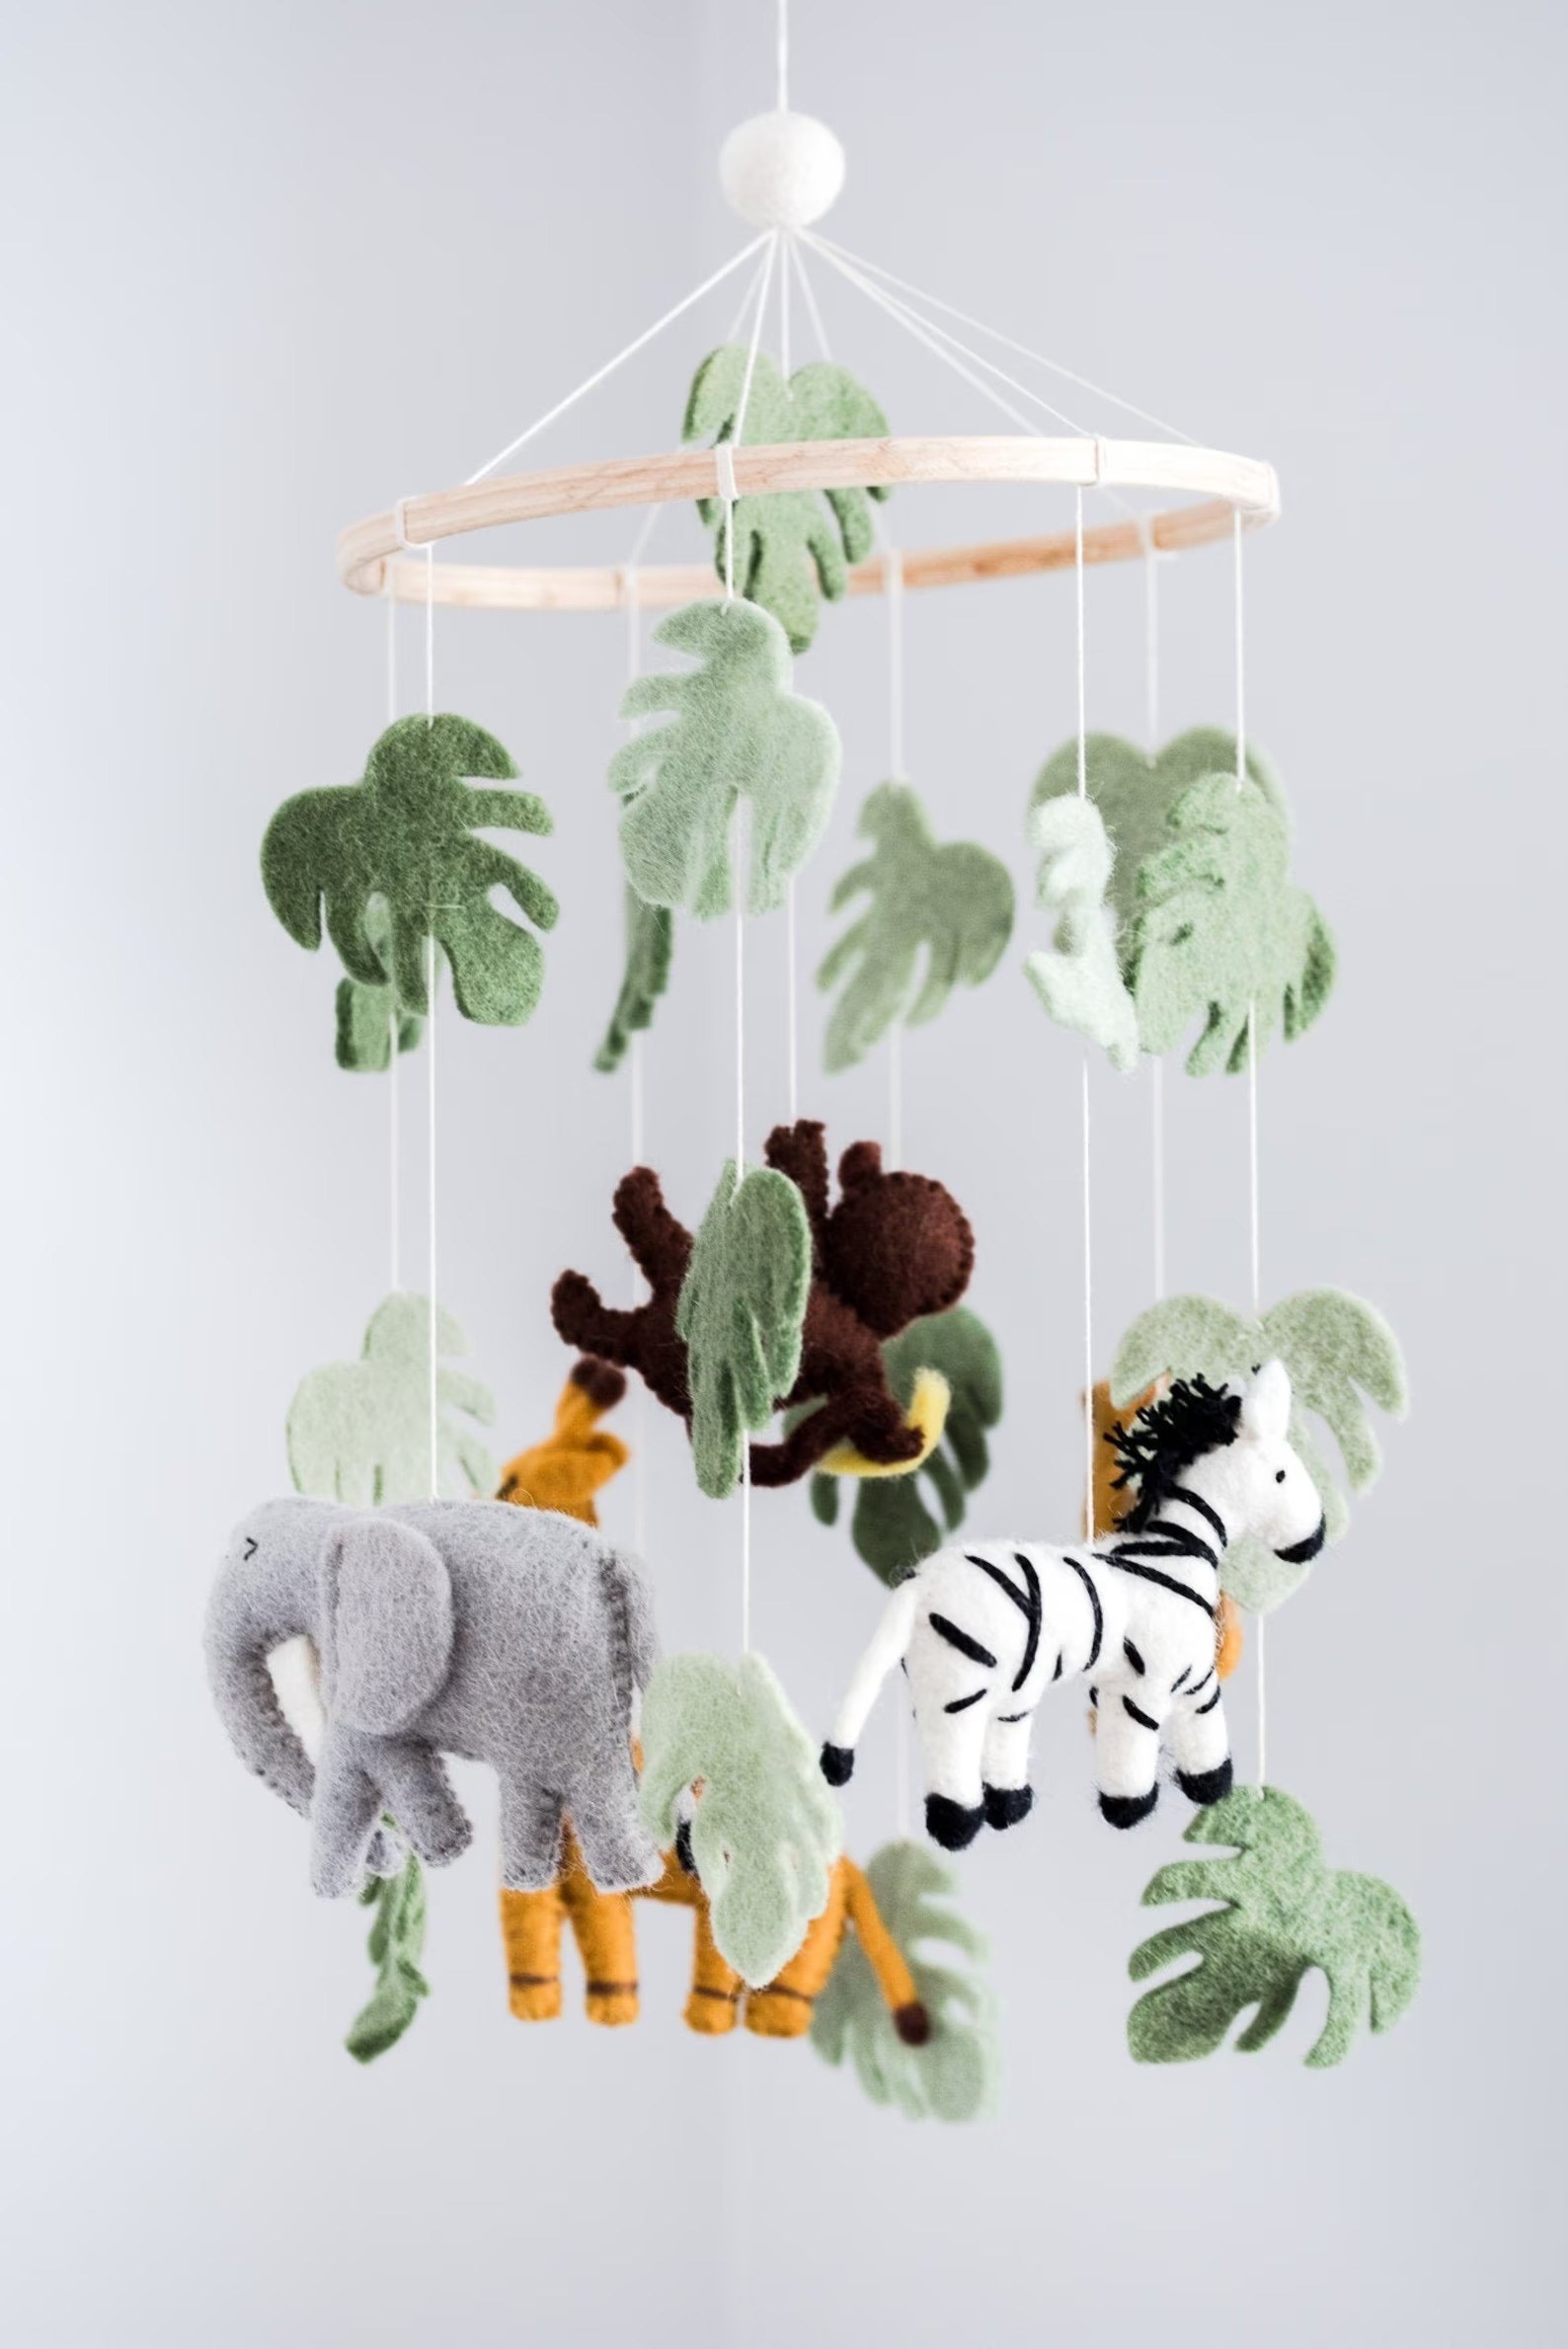 A mobile with felt animals is shown